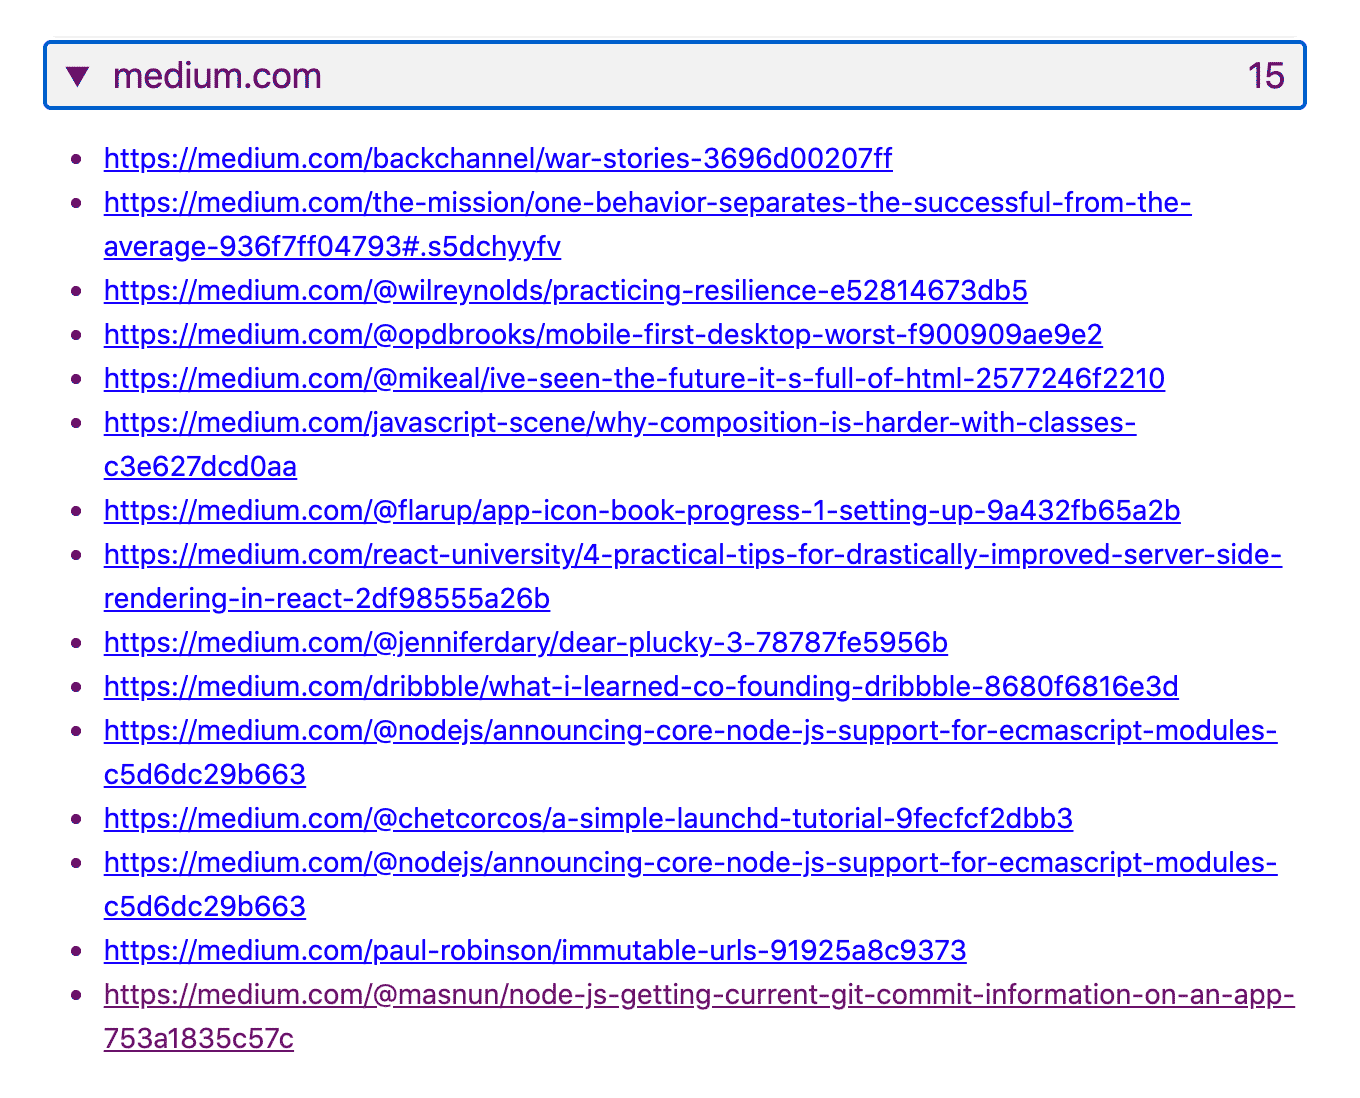 Screenshot of the various links from blog.jim-nielsen.com to independent authors on medium.com